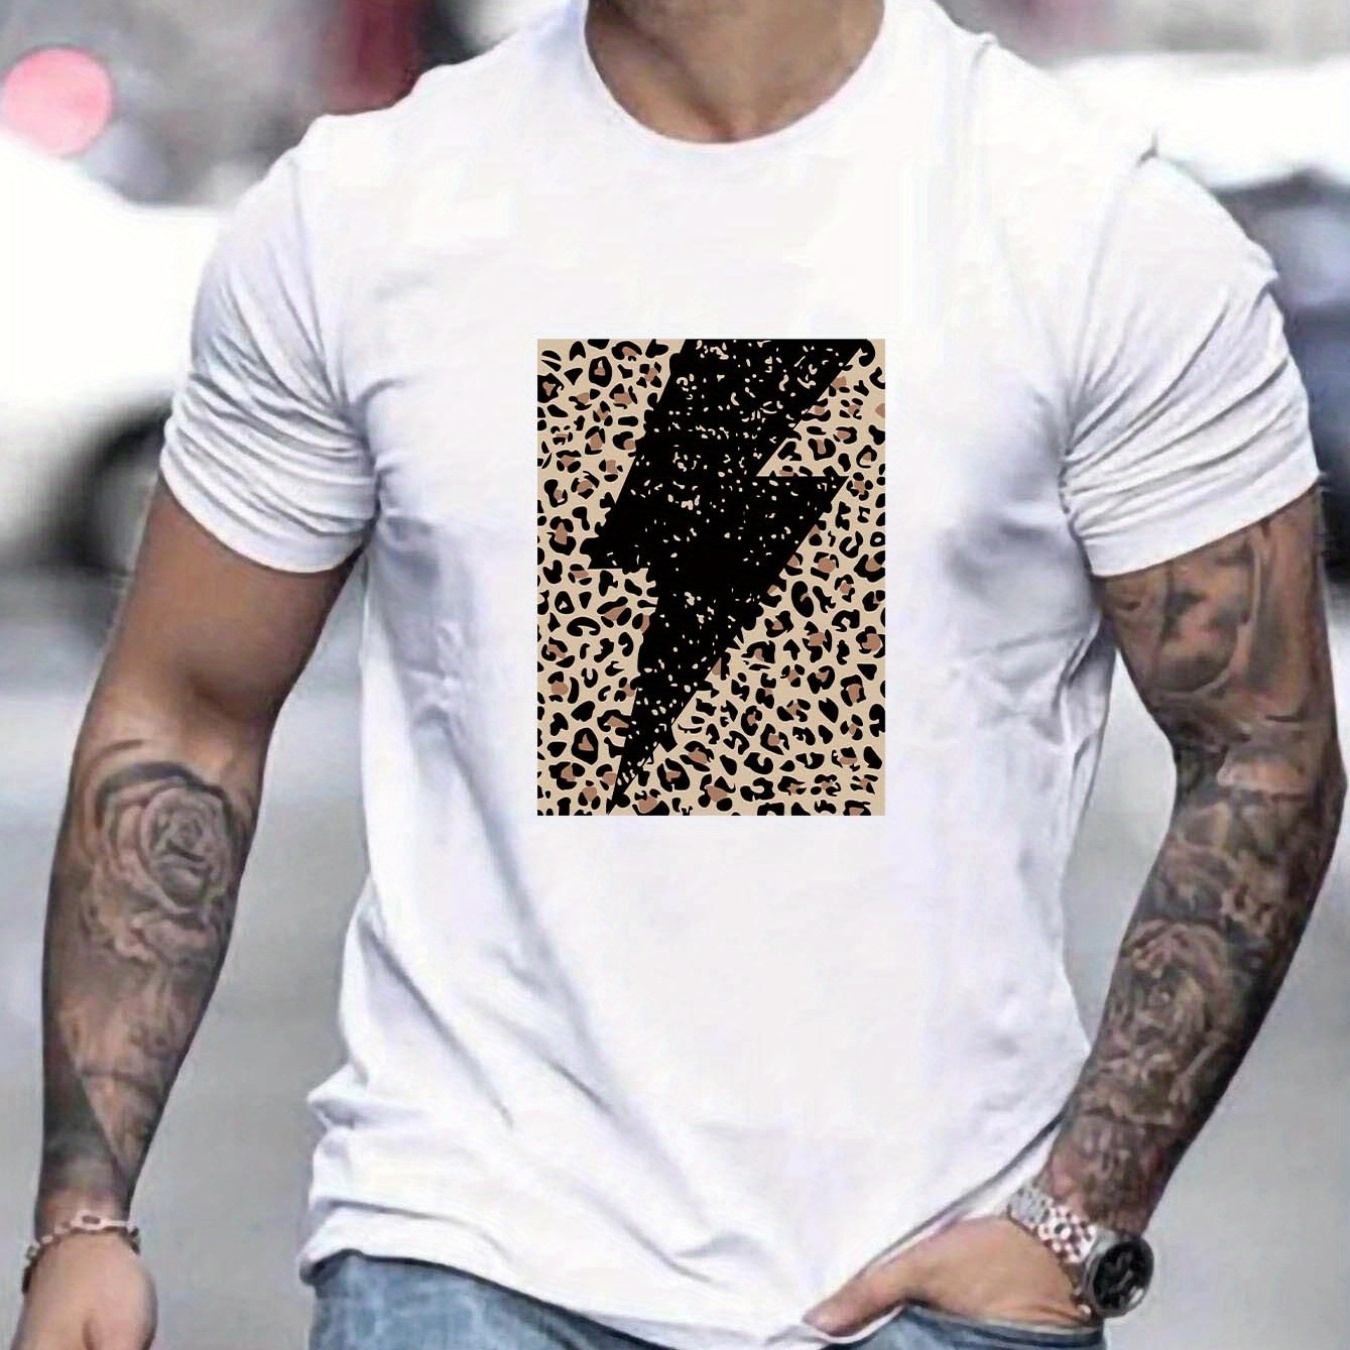 

Leopard Lightning Pattern Print Men's Slightly Stretch T-shirt, Graphic Tee Men's Summer Clothes, Men's Outfits